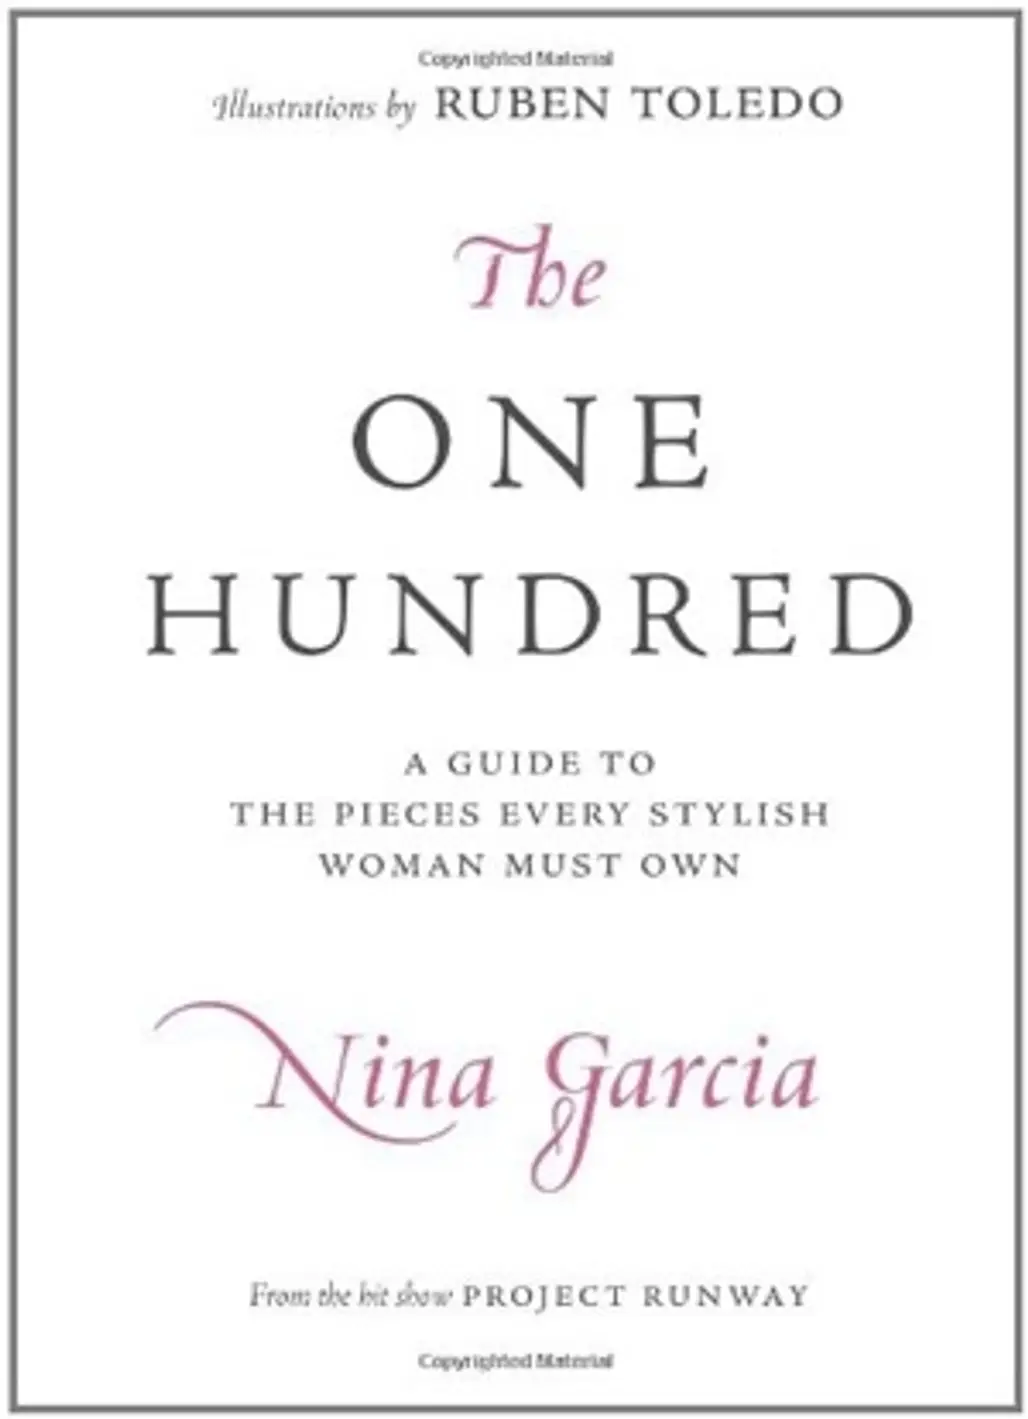 The One Hundred: a Guide to Pieces Every Stylish Woman Must Own by Nina Garcia